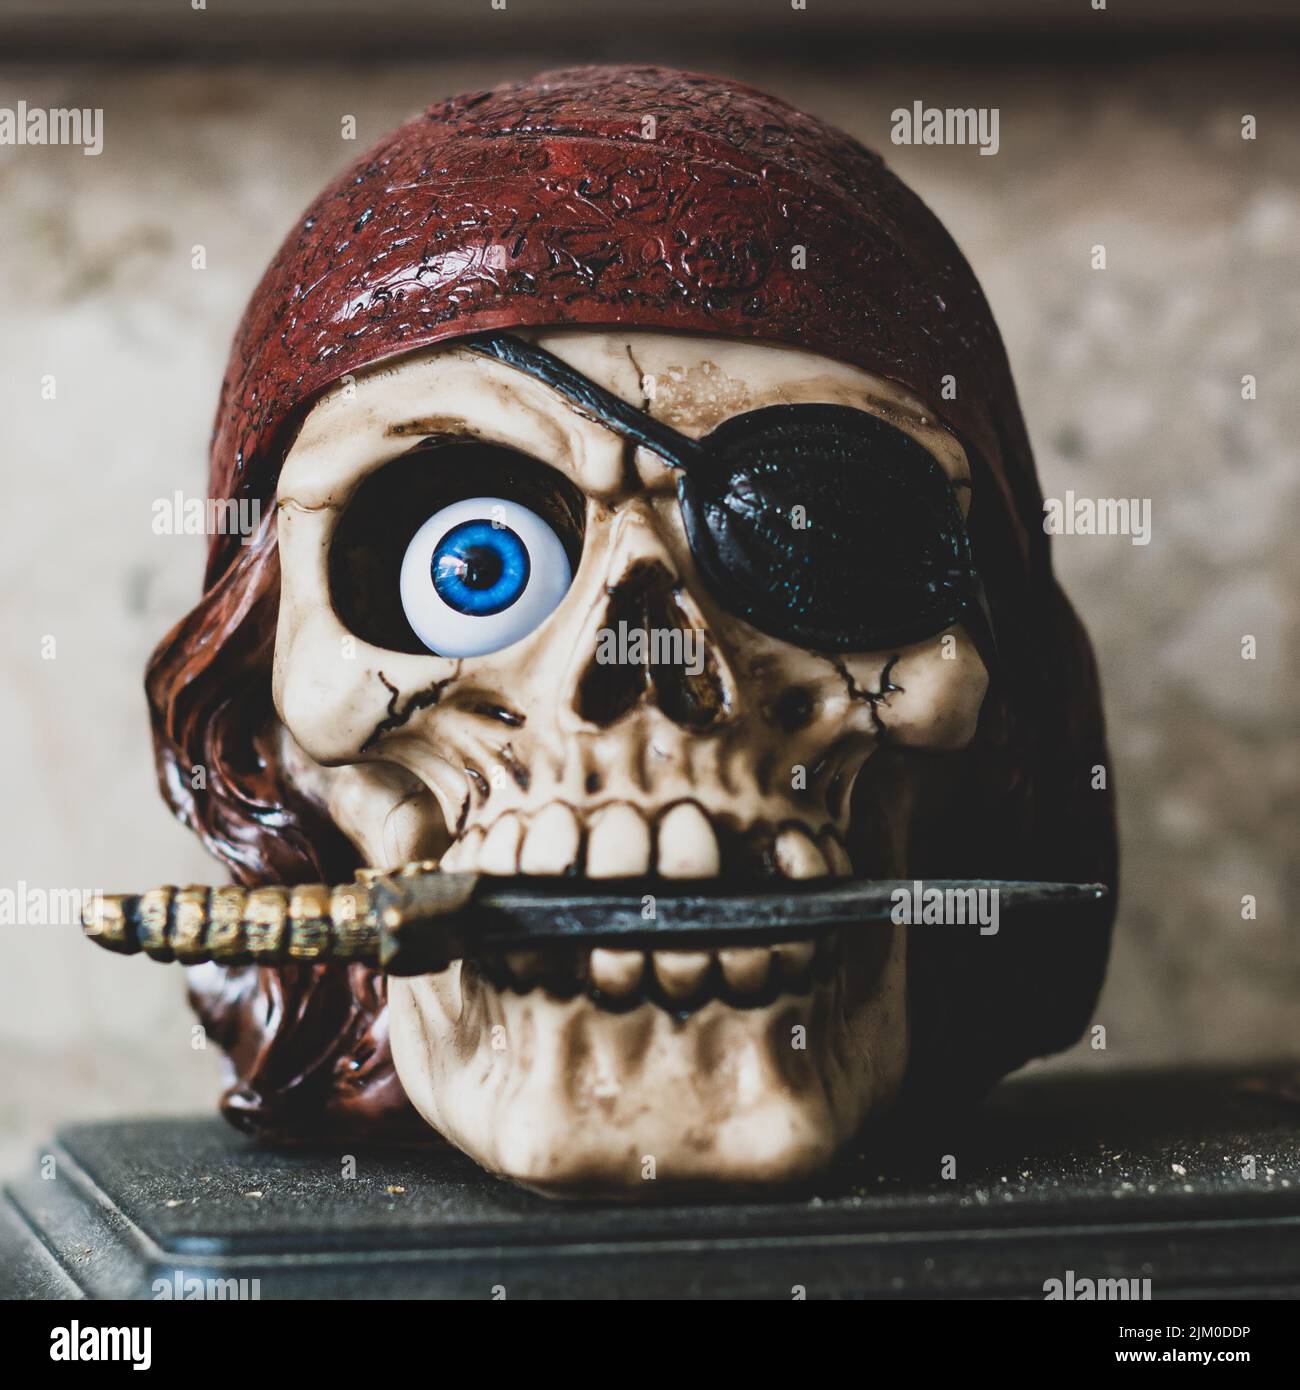 A closeup shot of a pirate skull figure with a knife in its mouth Stock Photo